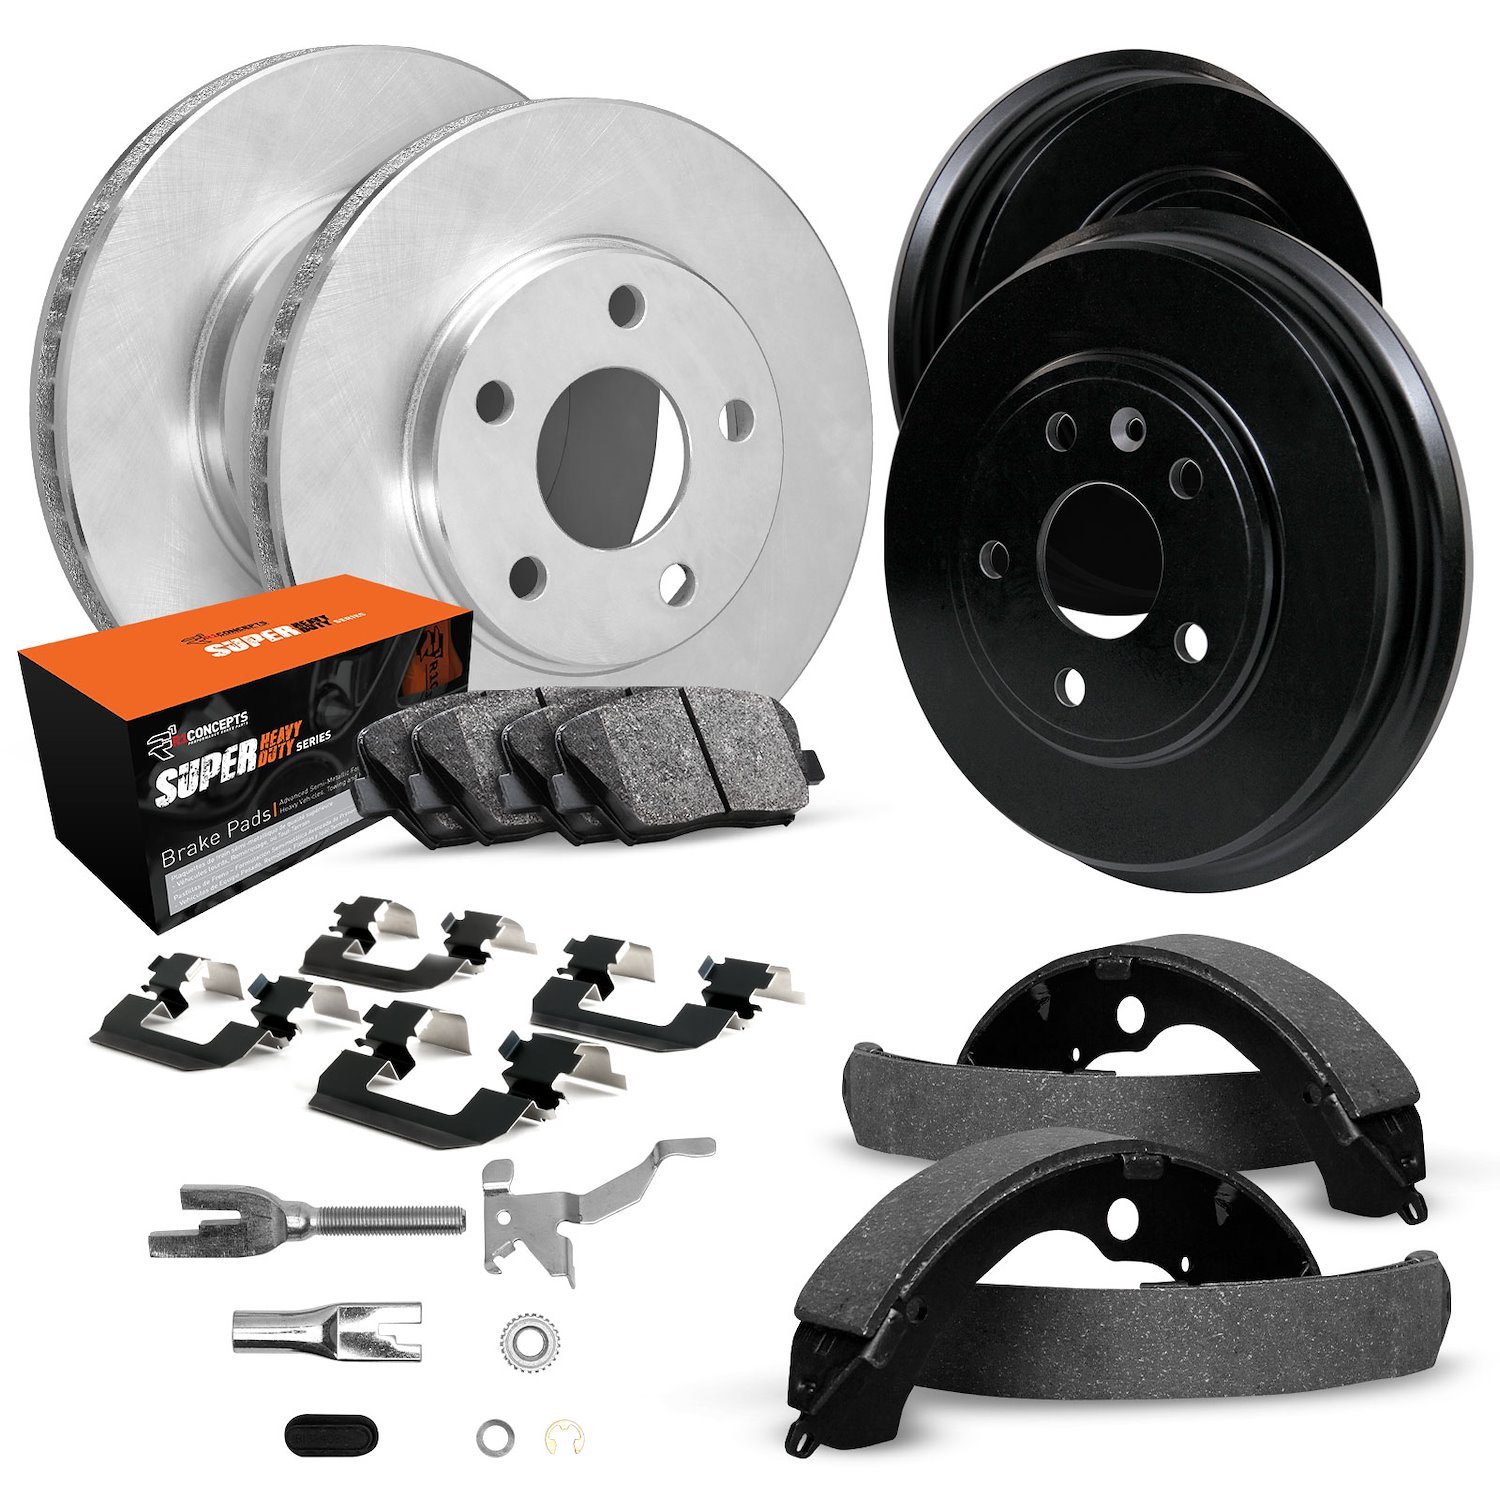 E-Line Blank Brake Rotor & Drum Set w/Super-Duty Pads, Shoes, Hardware, & Adjusters, 2004-2008 GM, Position: Front & Rear